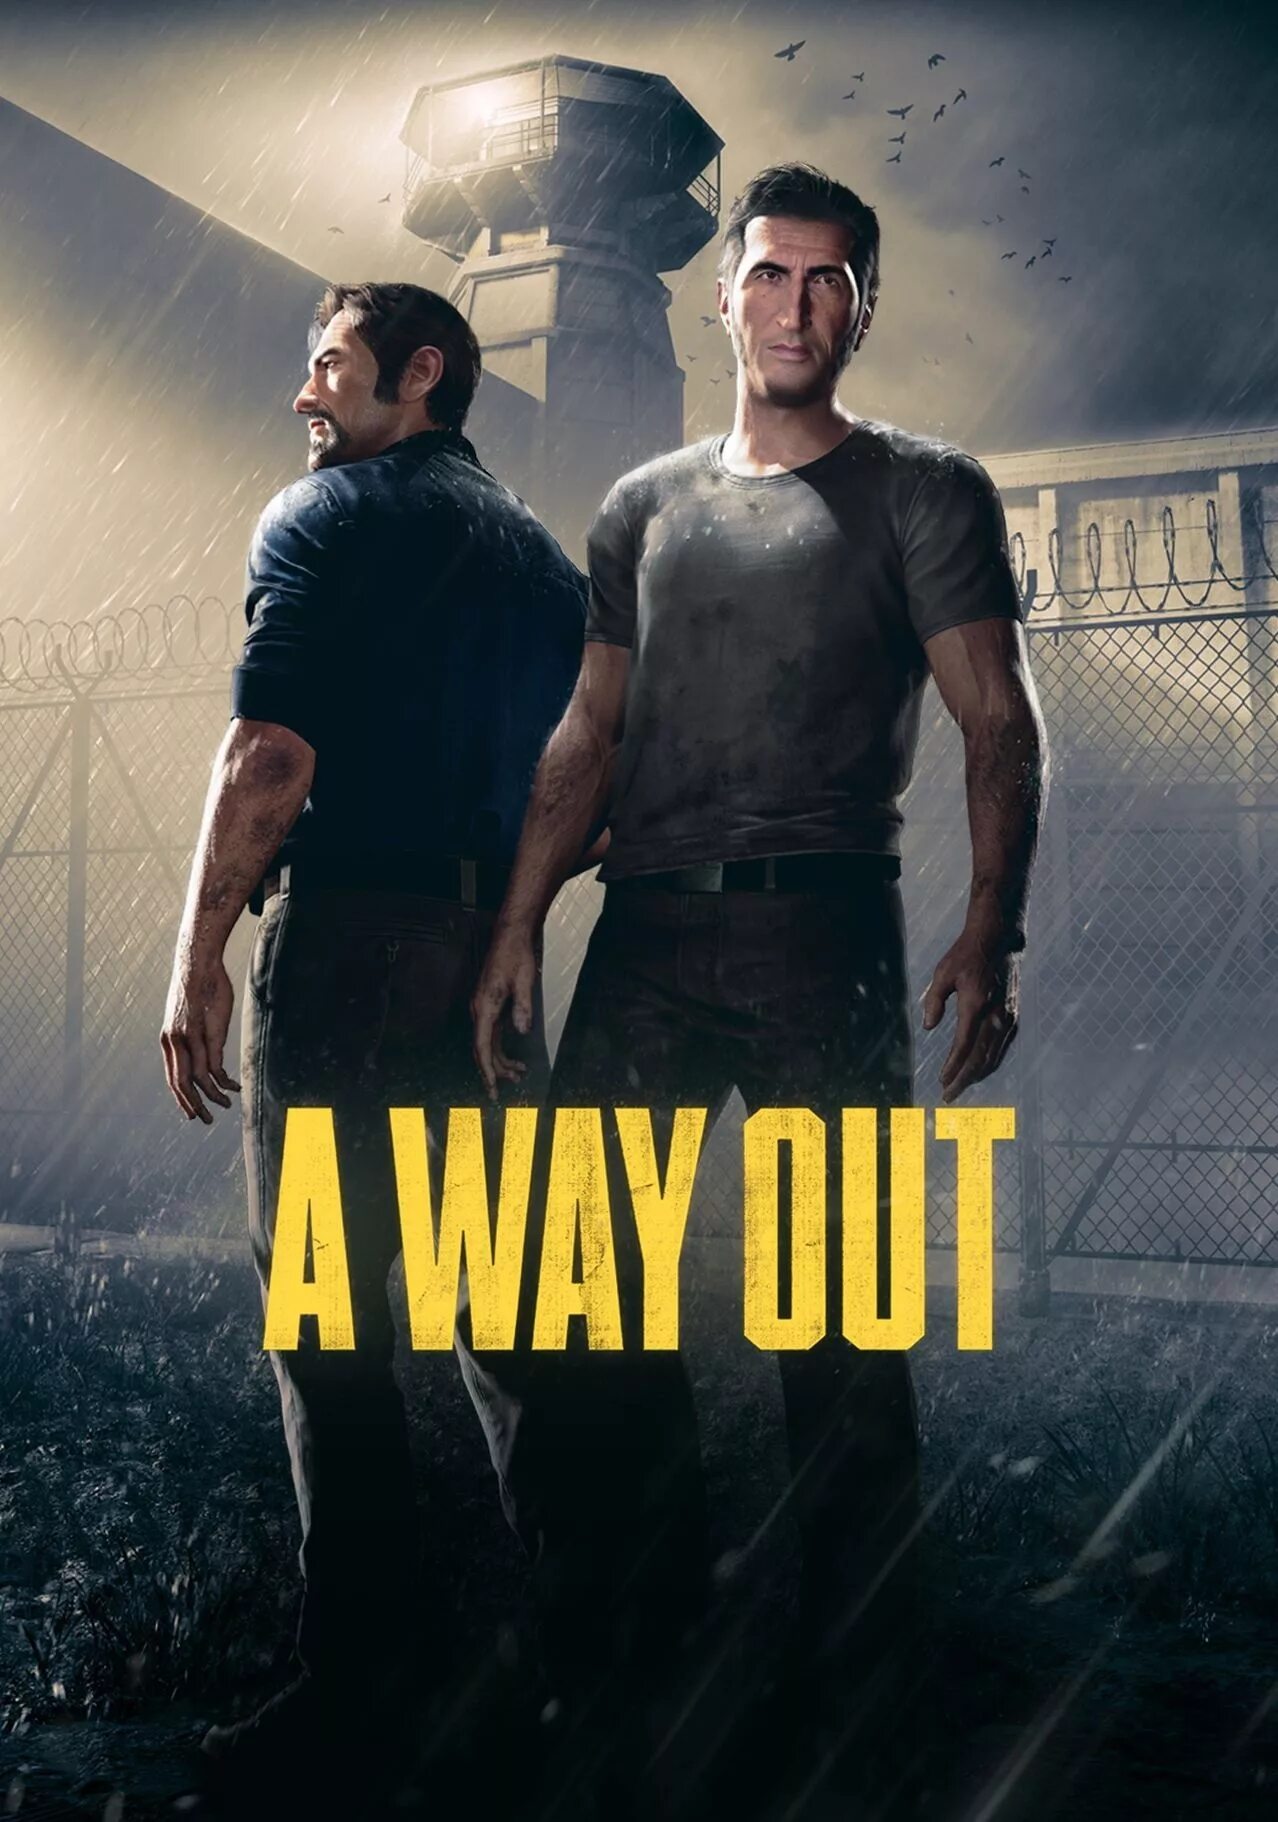 Way out игра. A way out ps4. A way out обложка игры. A way out (Xbox one).